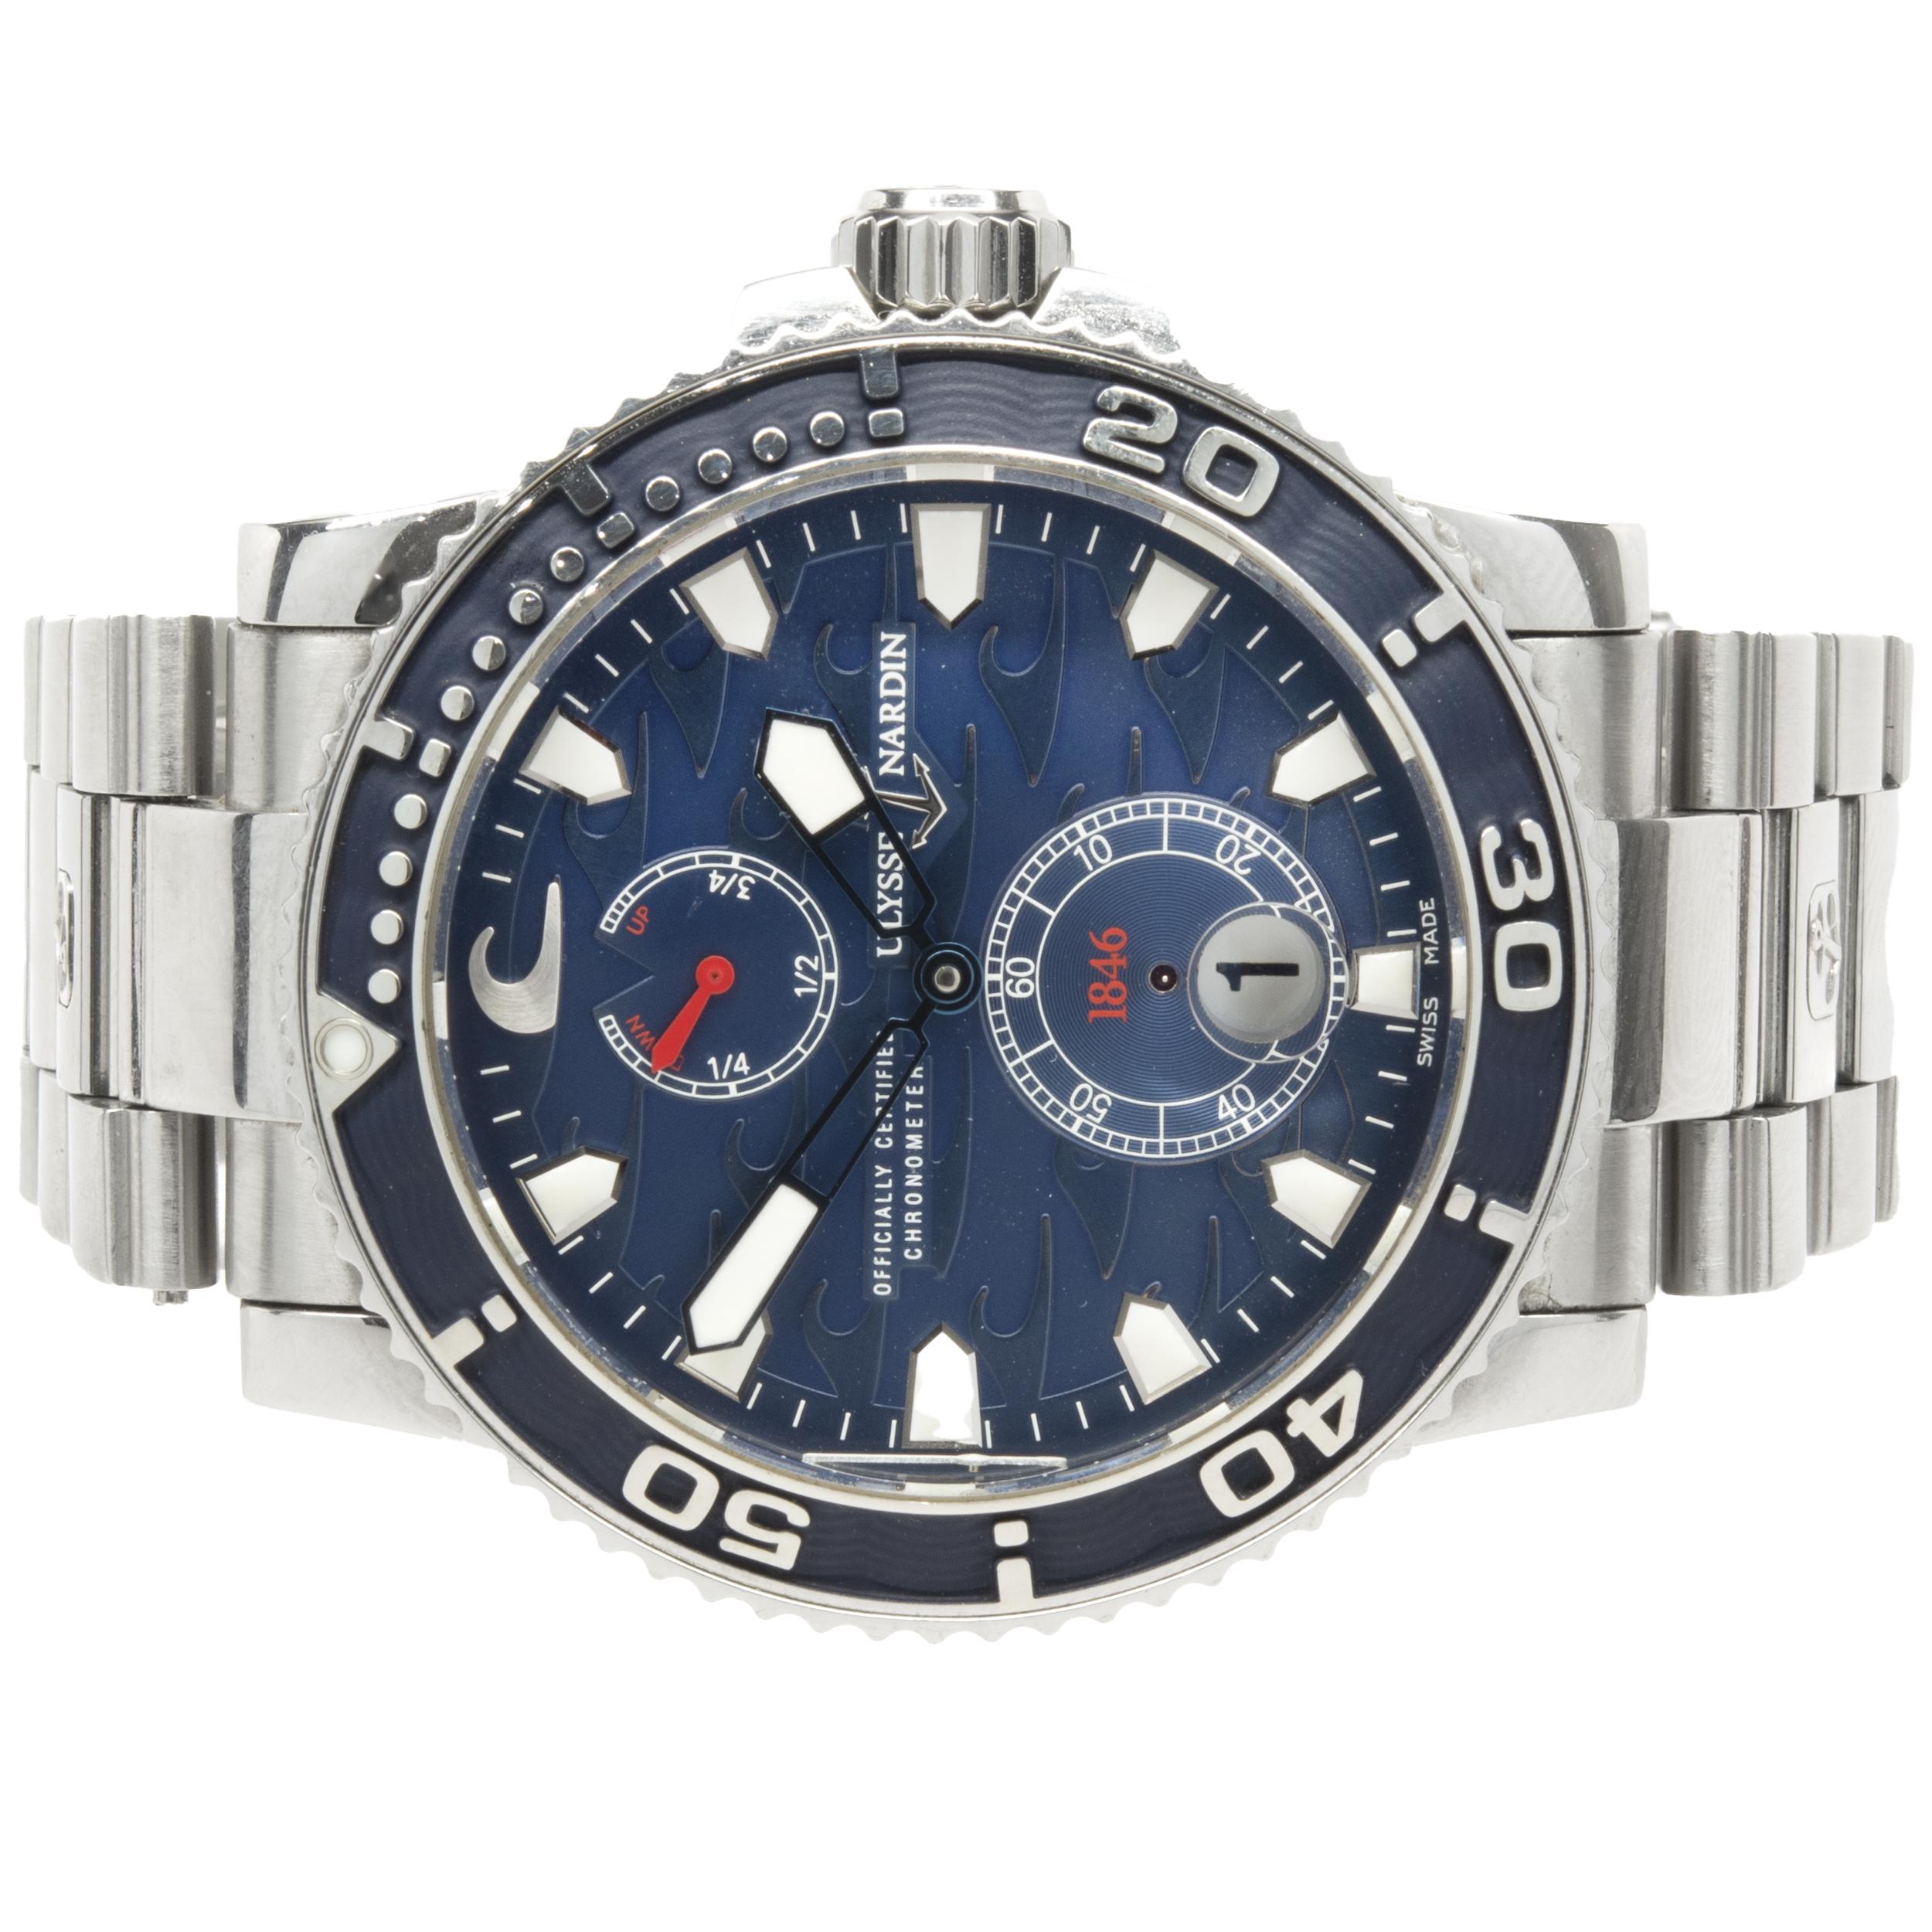 Movement: automatic
Function: hours, minutes, date, sub seconds
Case: 42mm stainless steel case, sapphire crystal, screw down crown
Band: stainless steel bracelet, deployment clasp 
Dial: blue wave motif
Serial#: 1XXX
Reference#: 263-36


No box or